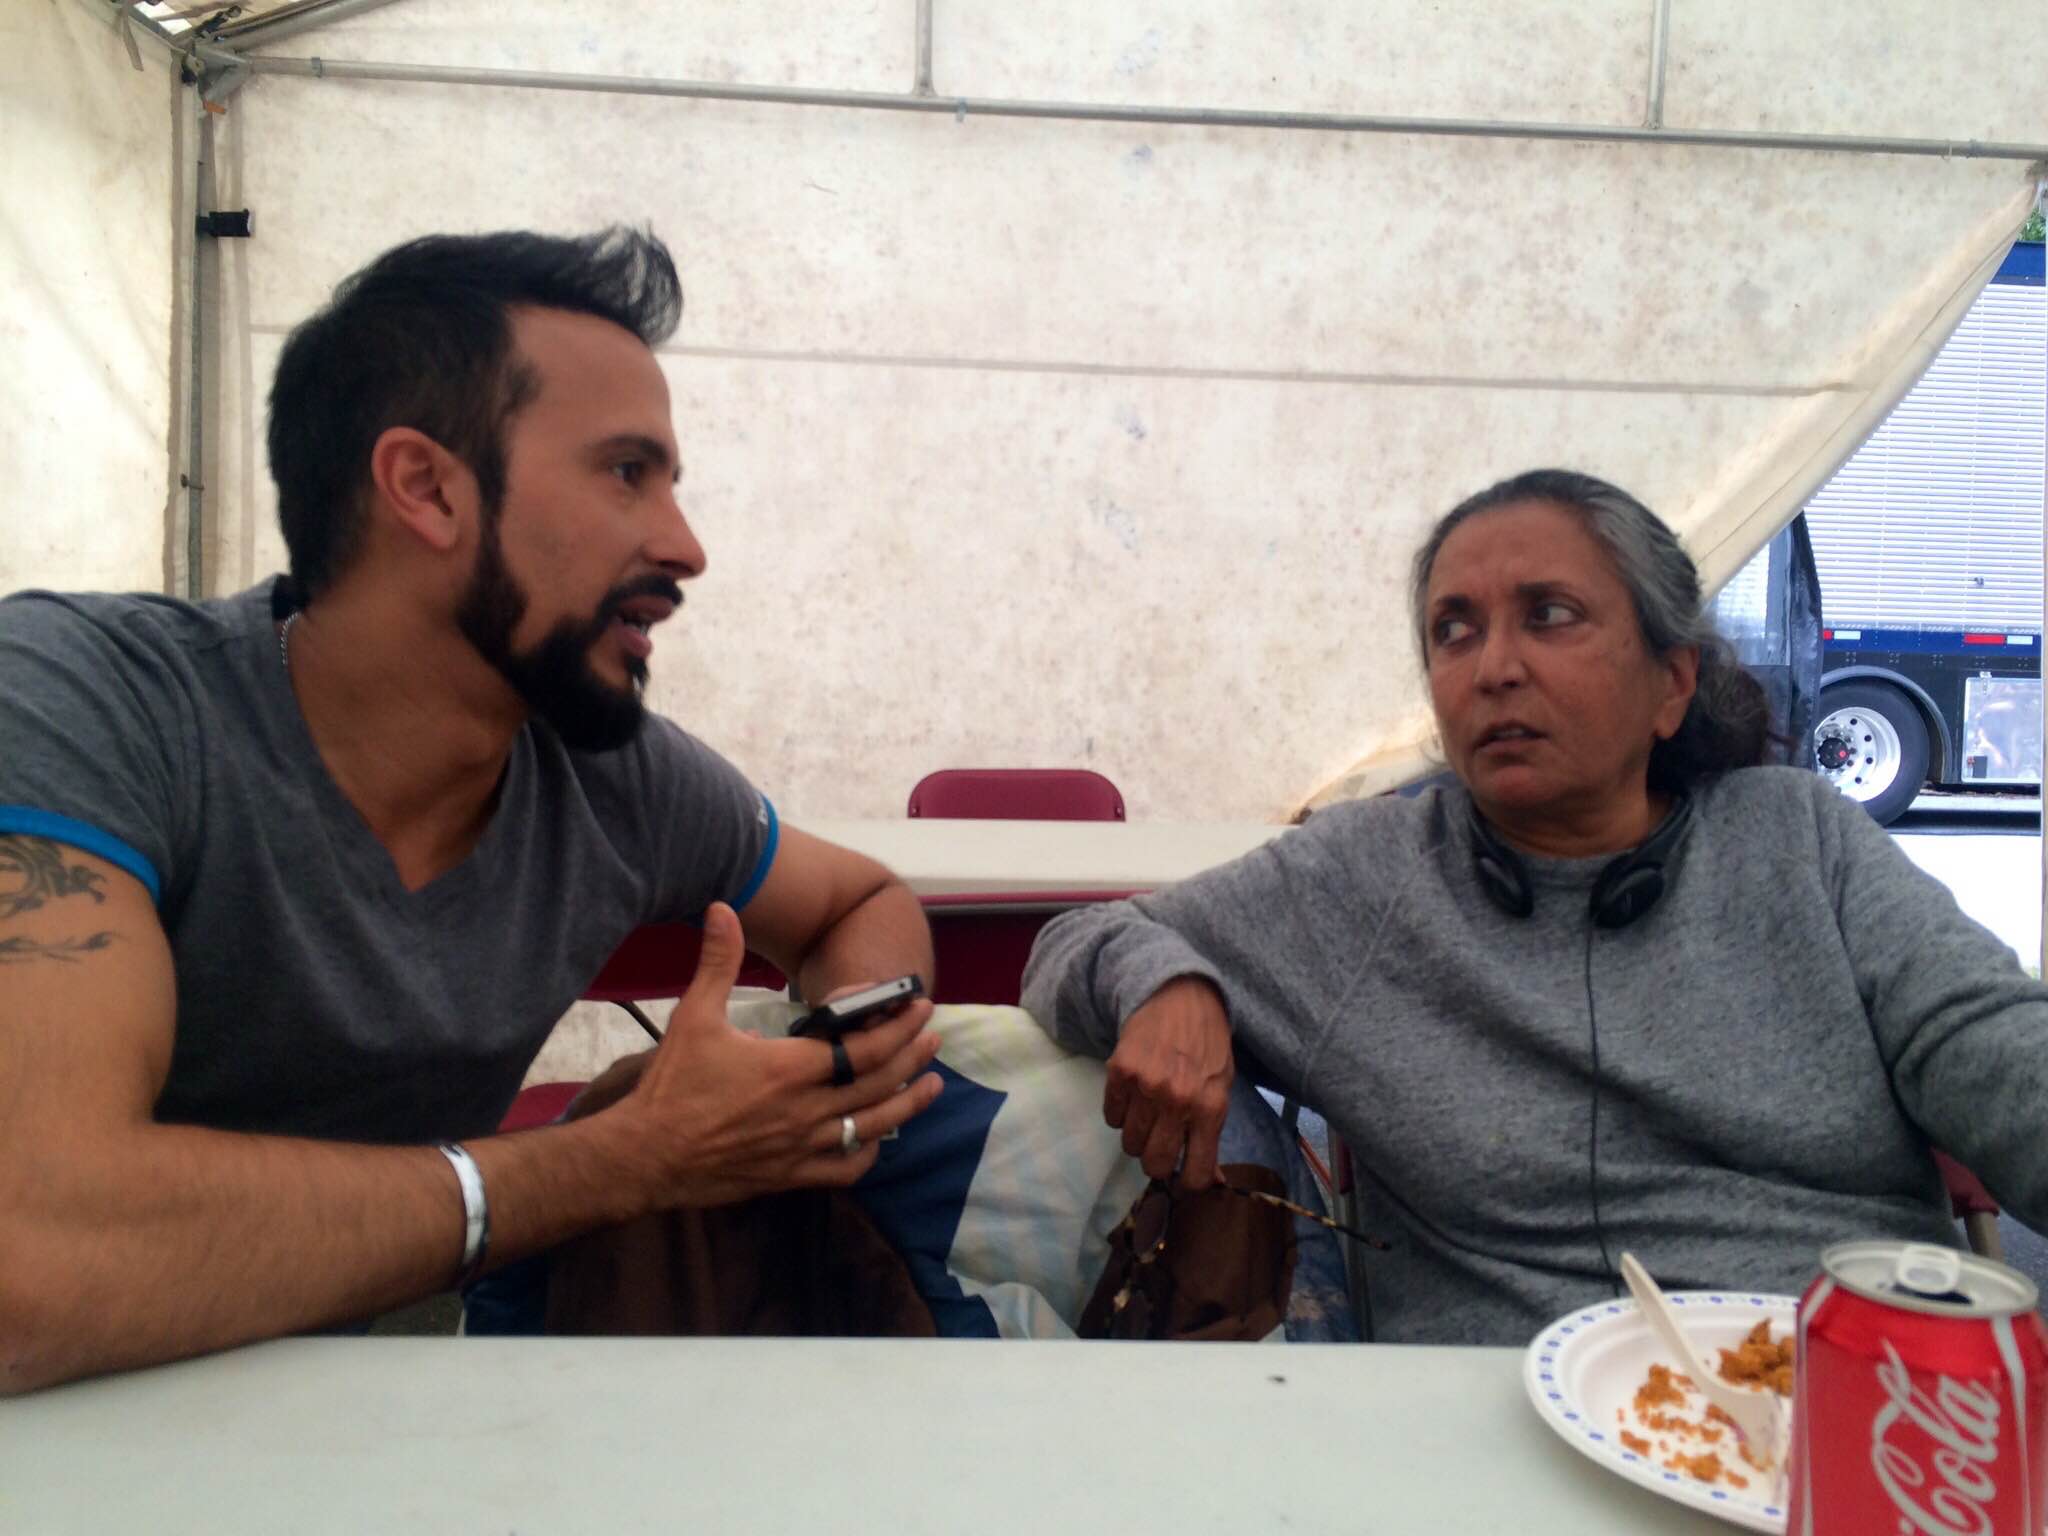 Deep in Conversation with the one and only prolific Deepa Mehta